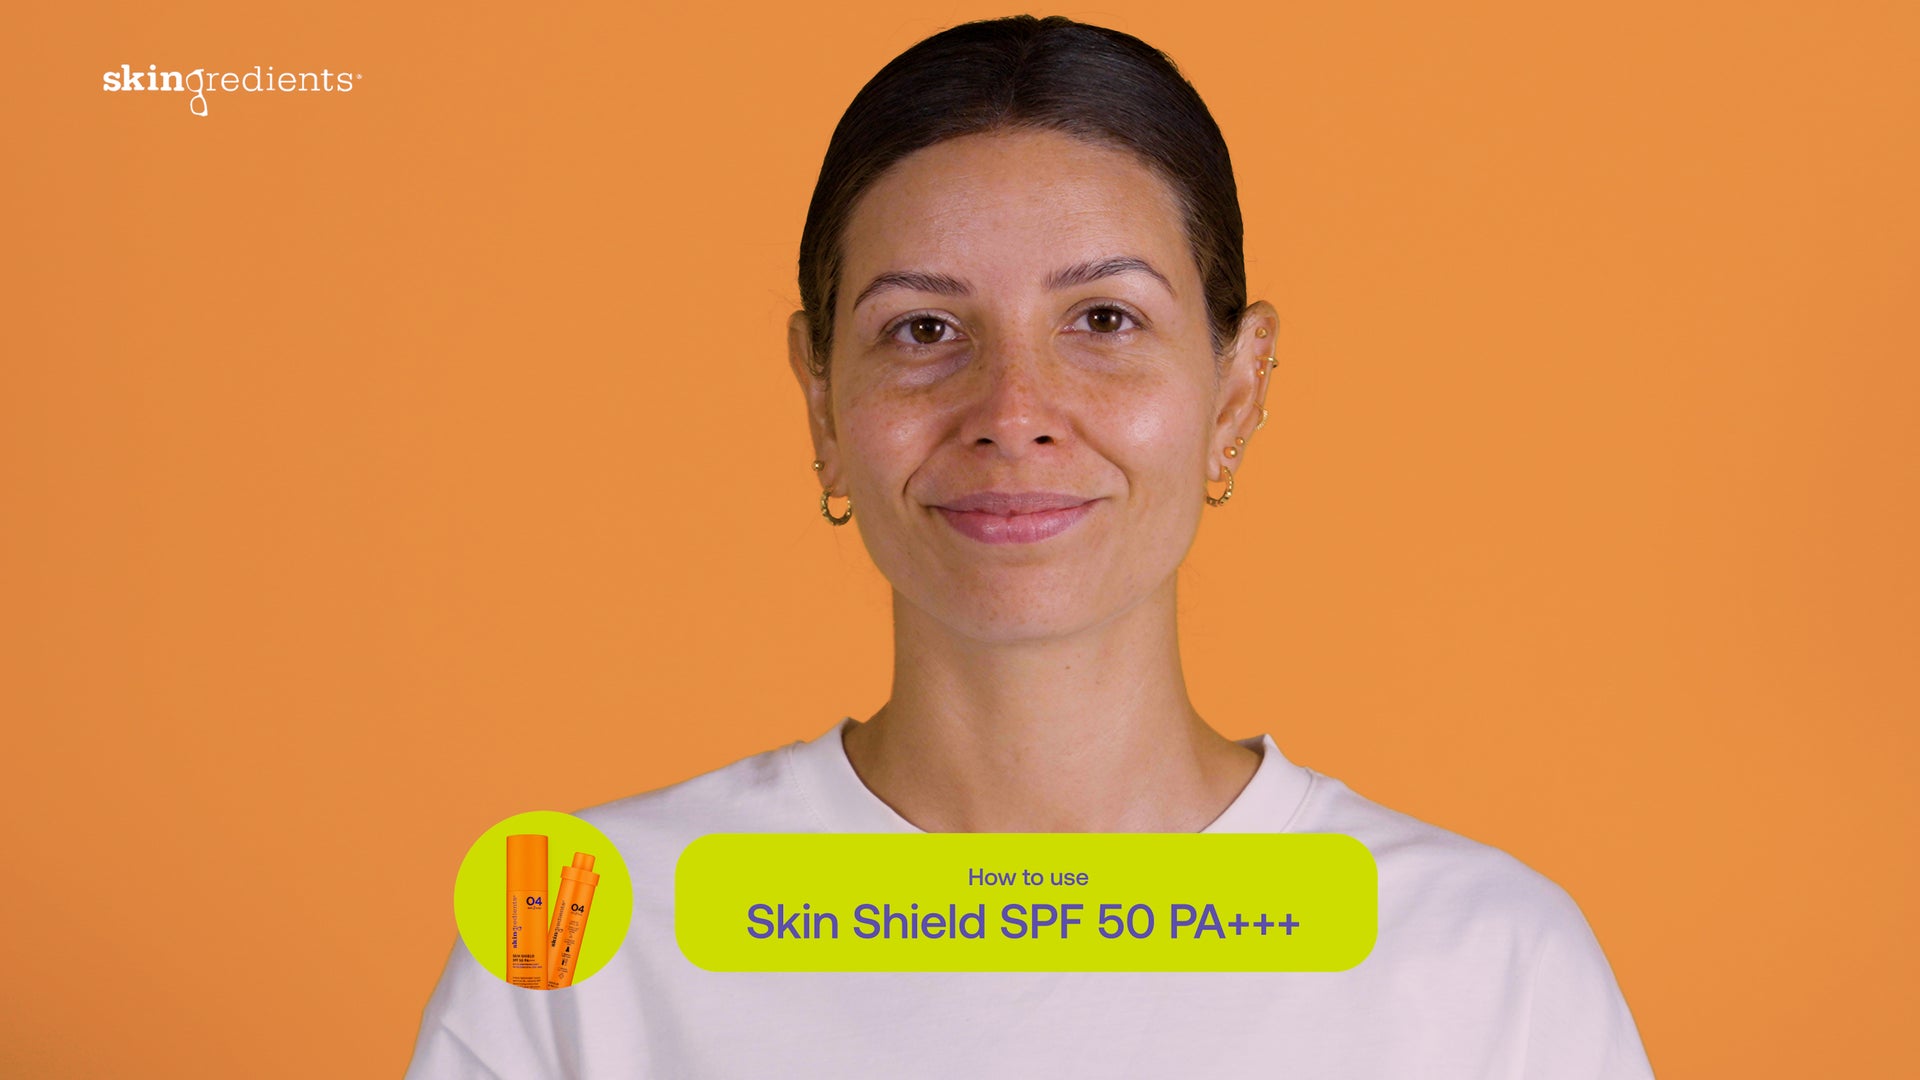 Load video: &lt;p&gt;Meet your ultimate Skin Shield Moisturising + Priming SPF 50 PA+++ Starter Kit containing your pack for life (Primary!) + your &lt;strong&gt;FREE&lt;/strong&gt; &lt;strong&gt;refill pack!&lt;/strong&gt;&lt;/p&gt;
&lt;p&gt;&lt;strong&gt; This bundle includes: &lt;/strong&gt;&lt;/p&gt;
&lt;p&gt;&lt;strong&gt;Skingredients® Skin Shield  Moisturising + Priming SPF 50 PA+++ (73ml – this jumbo size will last you!) Primary + Refill.&lt;/strong&gt; It is your multi award-winning, broad-spectrum SPF that’ll protect your skin + lightly moisturise, while imparting a dewy finish + peachy tint. Our SPF has a legion of fans including expert makeup artists that adore its dewy finish and glow, glow, glow!&lt;br&gt;The 04 in our KeyFour range – Skin Shield is the ESSENTIAL final step in every AM skin recipe! Sitting perfectly under makeup with zero pill, it’s your lightweight mineral parasol that’ll shield (wink, wink) your skin from damaging UVA + UVB rays, blue light (aka HEV light) emitted from the sun + our screens, pollution and infrared. The ideal priming base, recently described by Youtuber + Makeup Artist Wayne Goss as “the holy grail of sunscreens.”&lt;/p&gt;
&lt;p&gt;For added skin benefits (because we don’t do anything by halves), you’ll find niacinamide – otherwise known as vitamin B3 – and vitamin E for the antioxidant protection against pesky environmental aggressors. Plus, trust the moisturising addition of allantoin to smooth the skin. It is non-comedogenic, oil-free, water-resistant and non-greasy, and what’s more, there’s no need to stress about a chalky white cast and photo flashback.&lt;/p&gt;
&lt;p&gt;&lt;strong&gt;&lt;/strong&gt;&lt;strong&gt;Nerdie Note:&lt;/strong&gt; Make sure you keep your primary pack (tube-for-life that’s made from resilient, ultra-durable materials!) and continue to replenish with our value-saving planet-friendly refill tubes.&lt;/p&gt;
&lt;p&gt;&lt;em&gt;&lt;strong&gt;*Please note, the products included in this bundle have an expiry date of November 2024.&lt;/strong&gt;&lt;/em&gt;&lt;/p&gt;